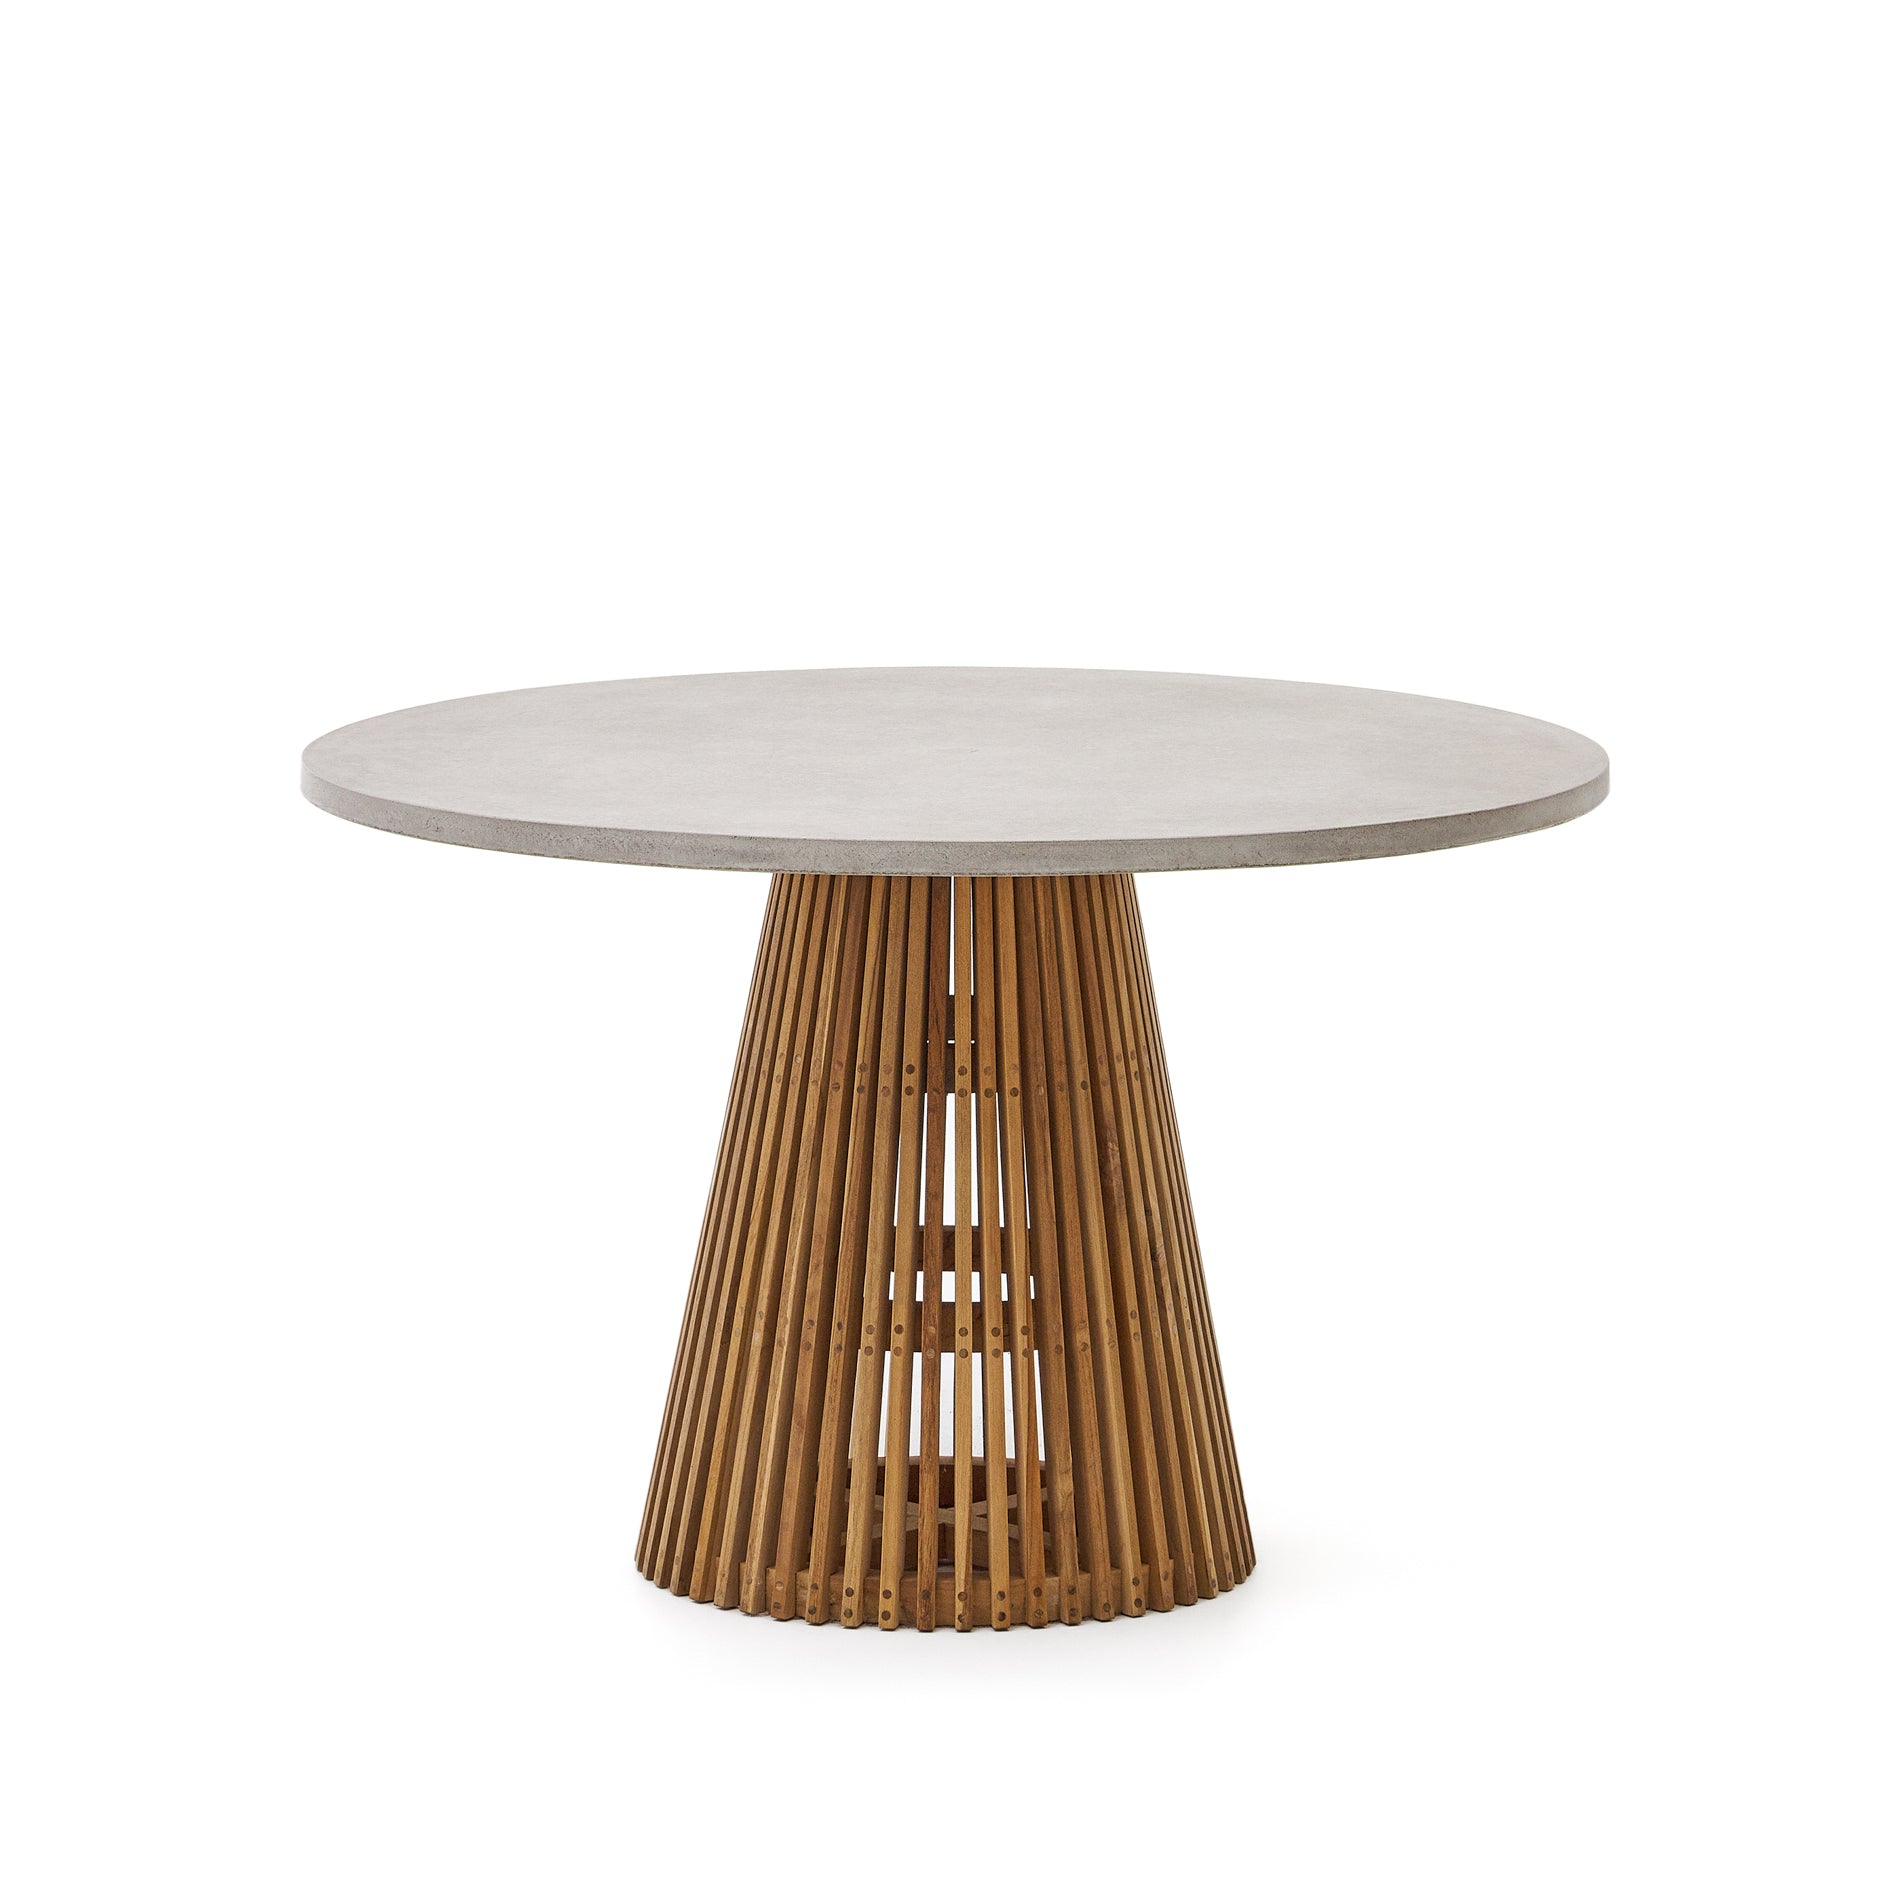 Alcaufar round outdoor table made of solid teak and gray cement Ø 120 cm